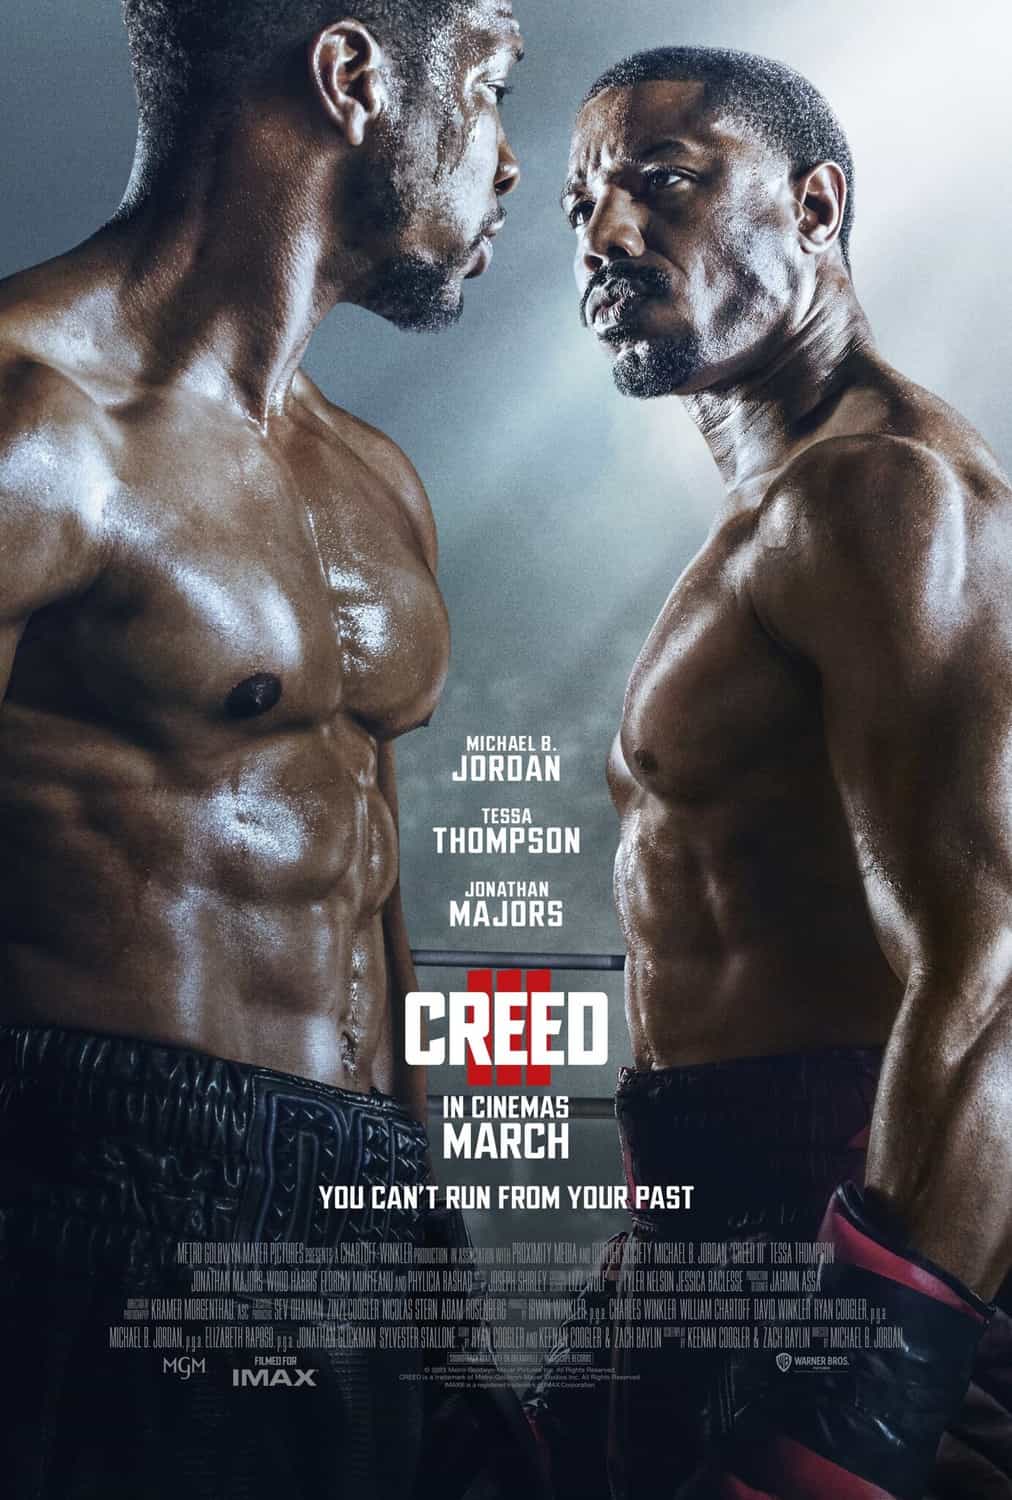 New poster has been released for Creed III which stars Michael B. Jordan and Tessa Thompson - movie UK release date 3rd March 2023 #creediii